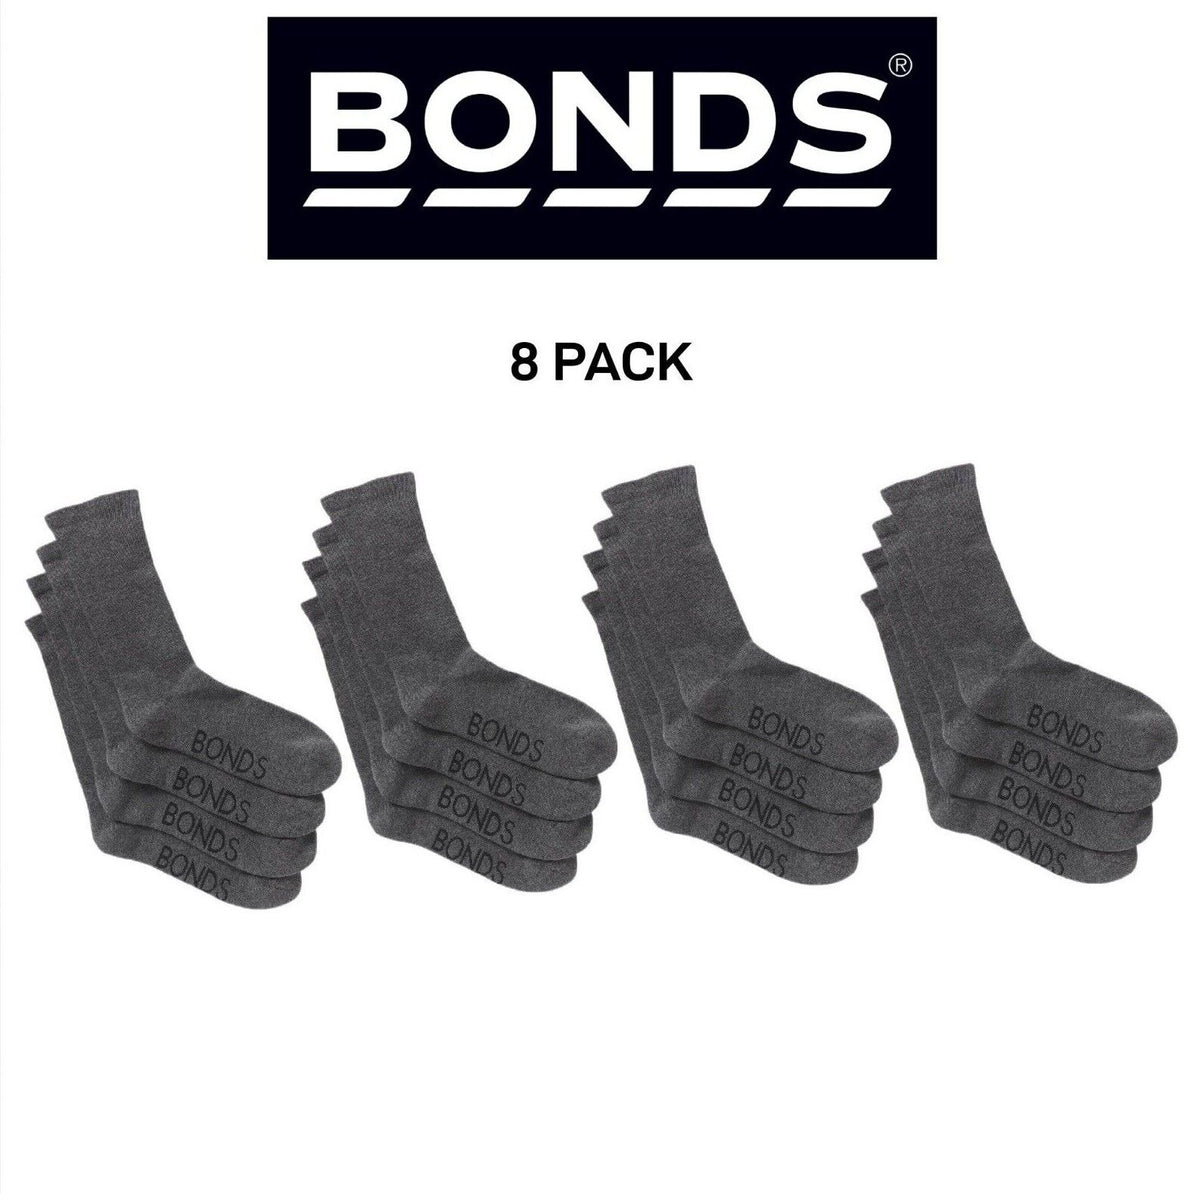 Bonds Mens Very Comfy Crew Socks Comfortable Cushioned Sole 8 Pack SZFP2N